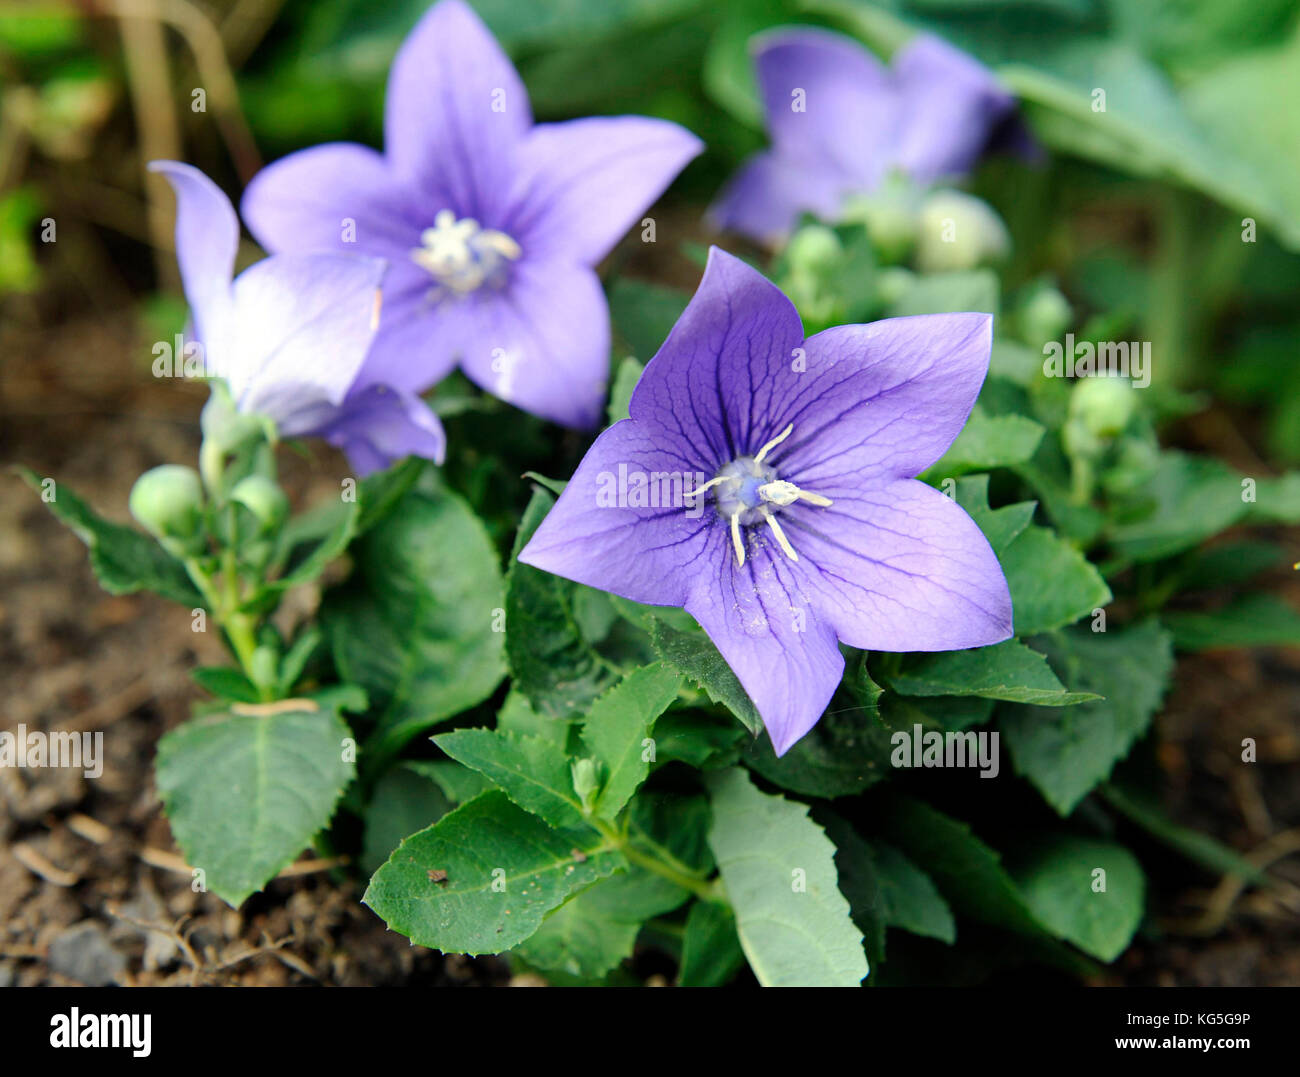 balloon flower, also known as a Chinese bellflower, an adornment in the gardens Stock Photo